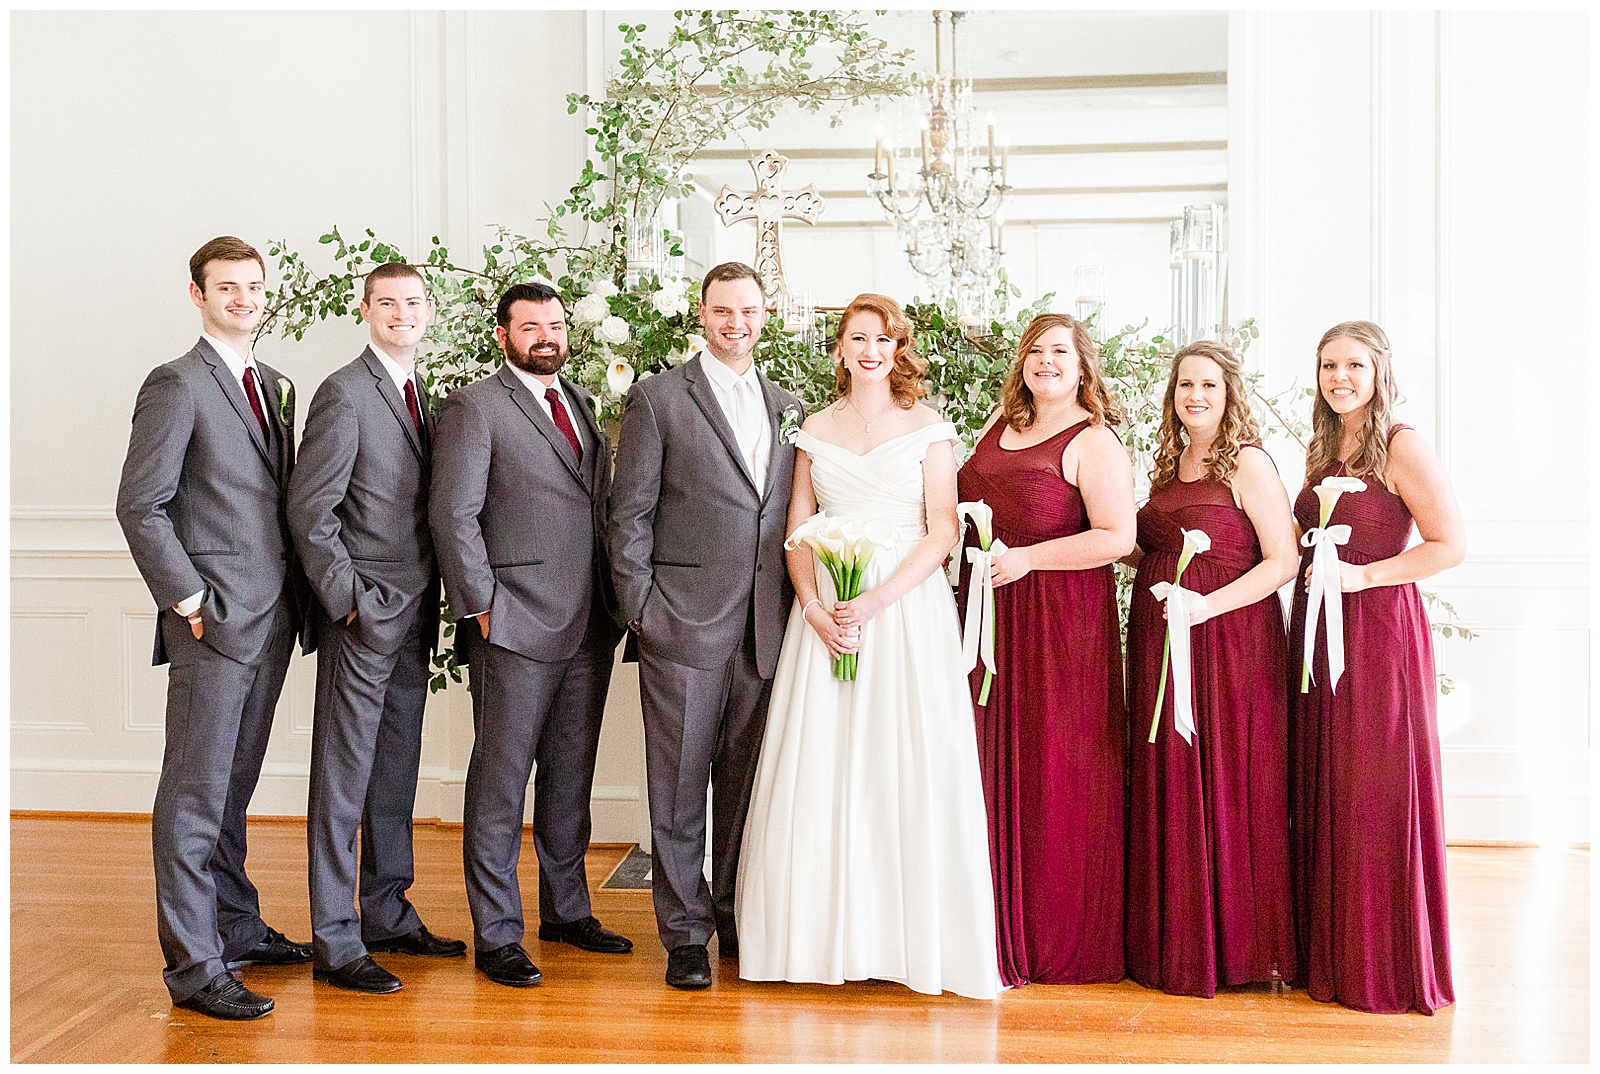 Gorgeous Bridal Party Portraits with red-themed bridesmaid dresses at elegant indoor floral venue in 1940s Modern Vintage Wedding in Charlotte, NC | check out the full wedding at KevynDixonPhoto.com